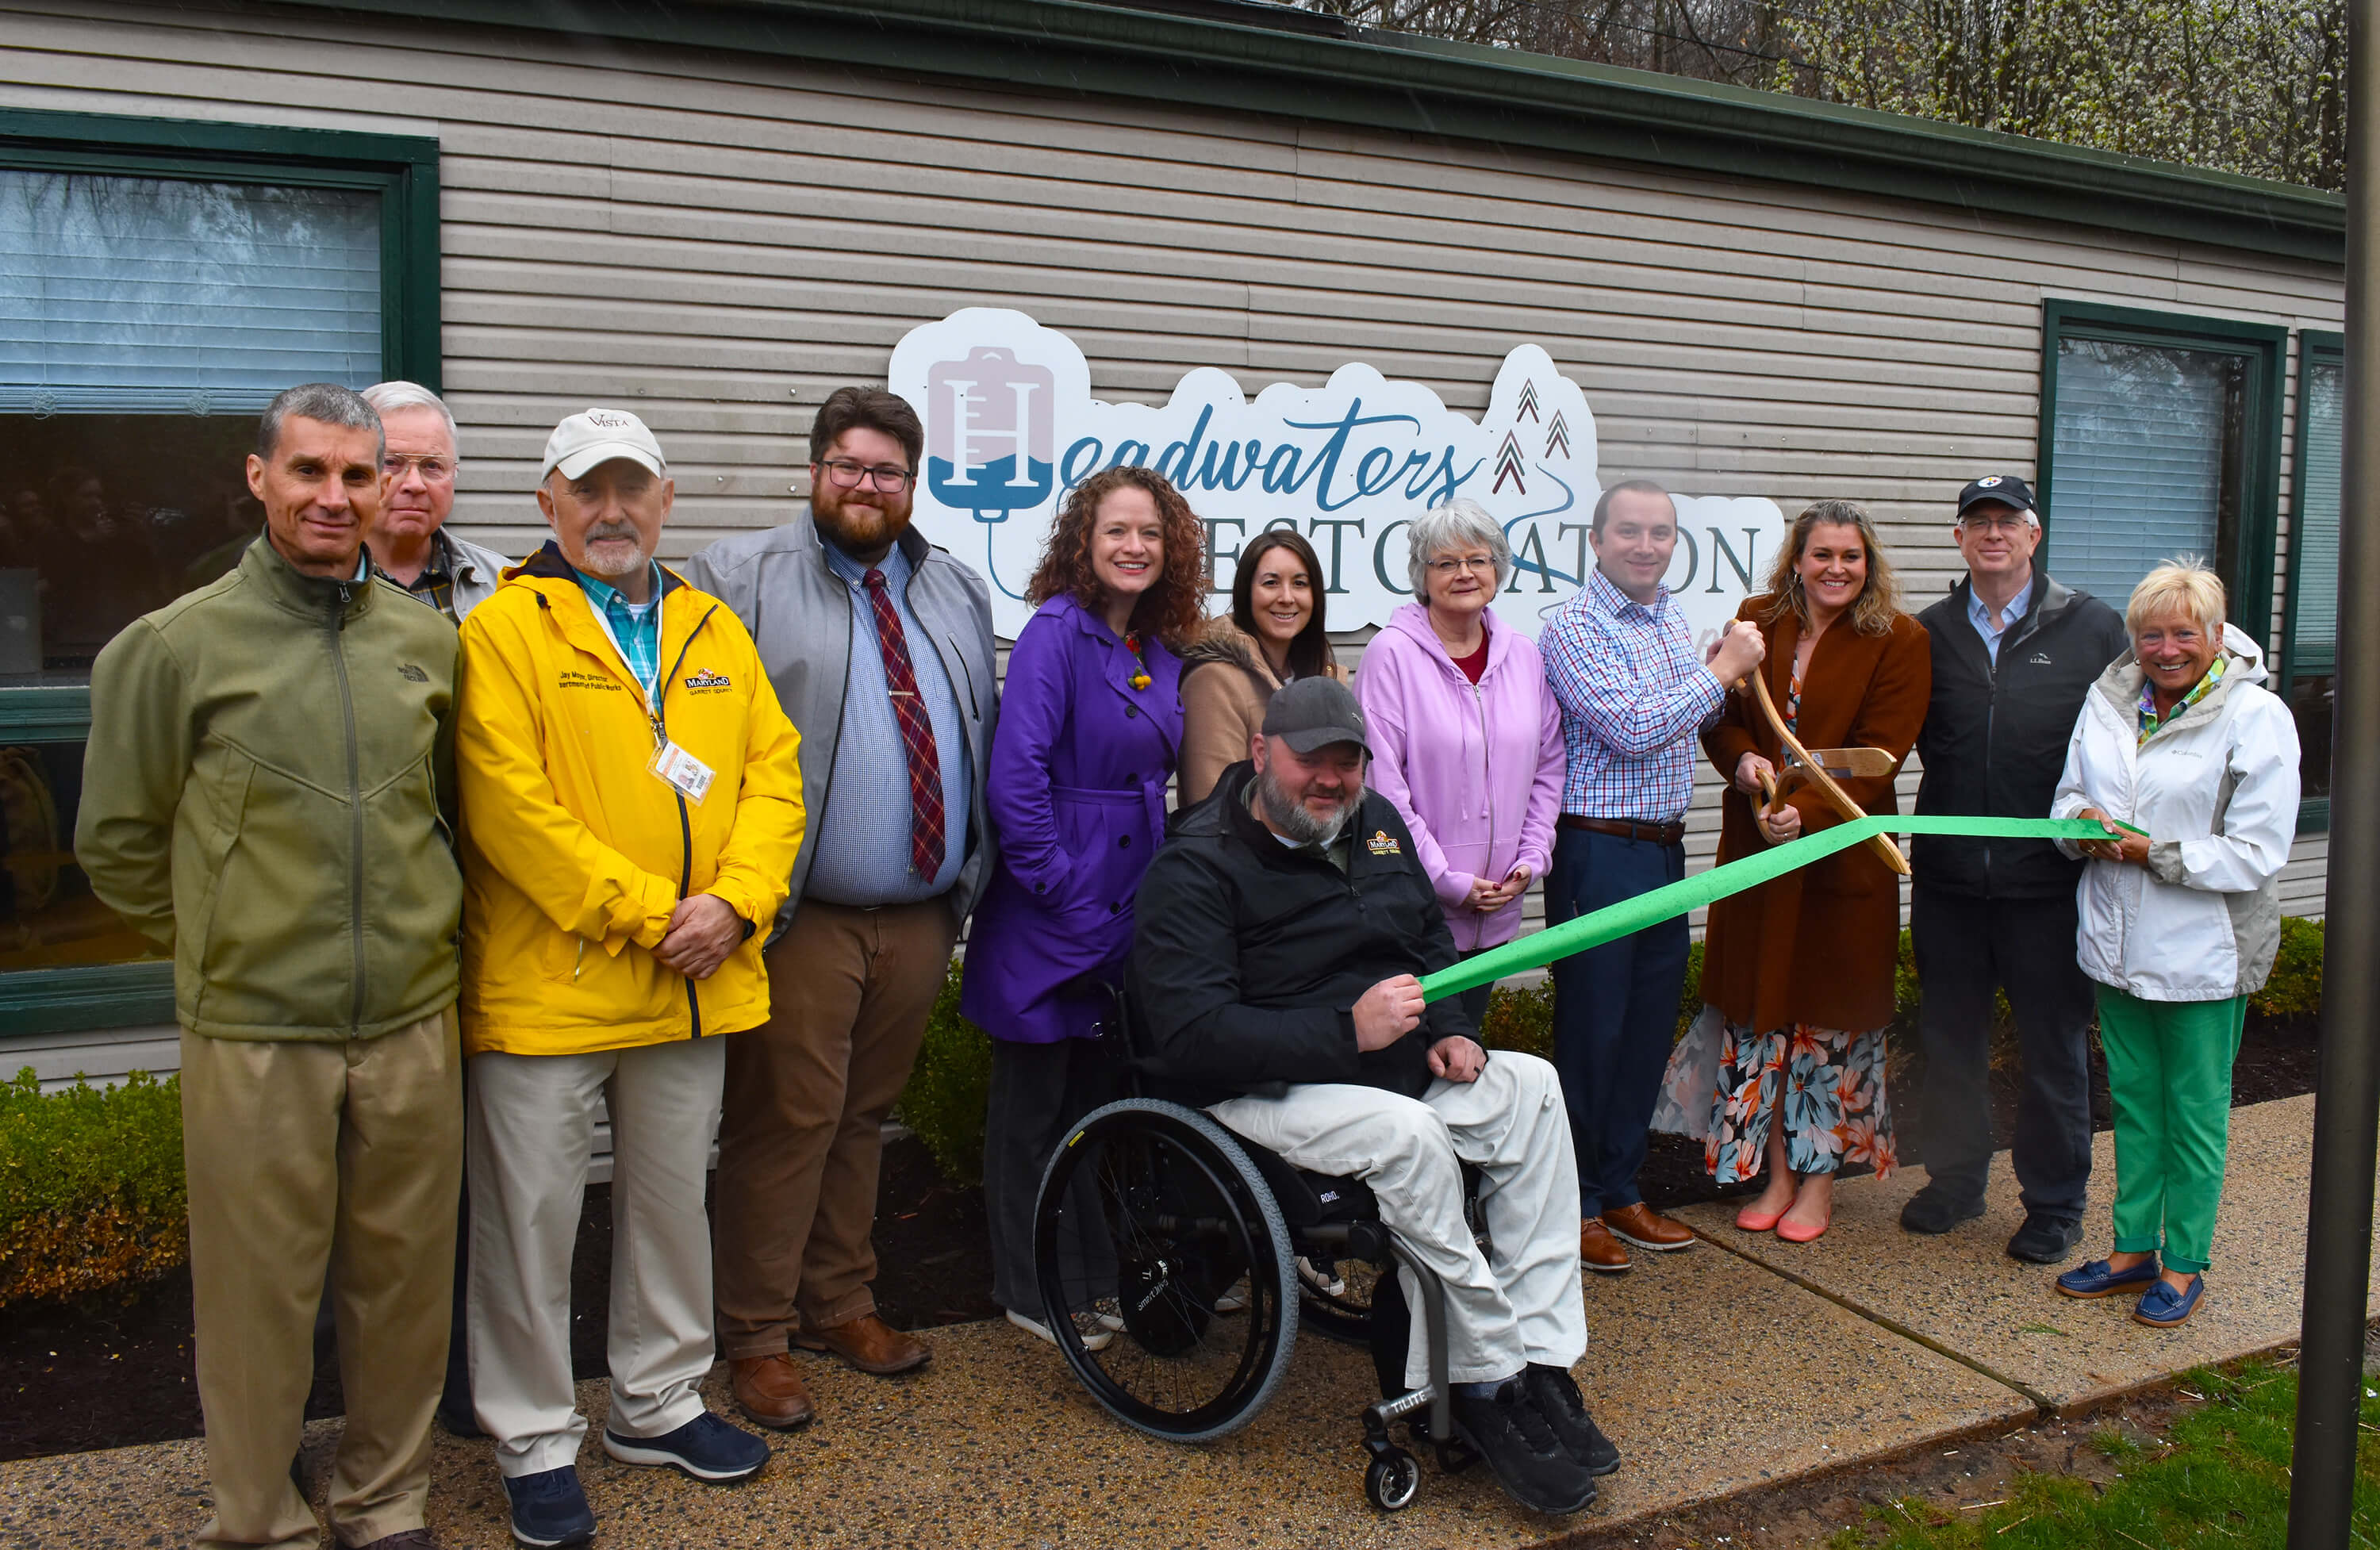 On Friday, April 12, the Garrett County Chamber of Commerce partnered with the Garrett County Department of Business Development to hold a ribbon cutting ceremony for the grand opening of Headwaters Restoration Therapy.